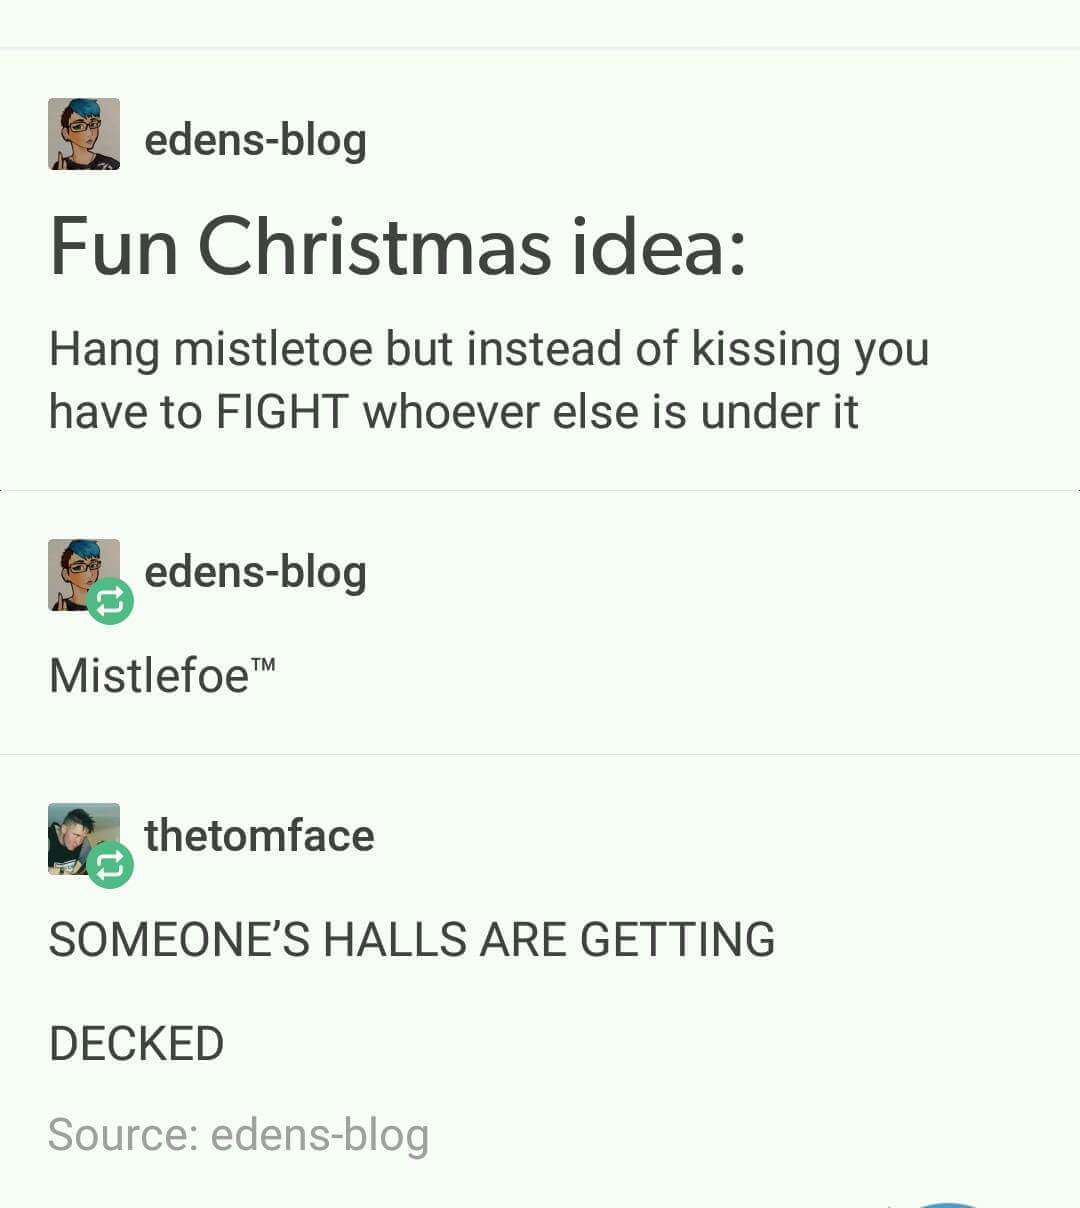 someone's halls are getting decked - edensblog Fun Christmas idea Hang mistletoe but instead of kissing you have to Fight whoever else is under it S edensblog Mistlefoe thetomface Someone'S Halls Are Getting Decked Source edensblog